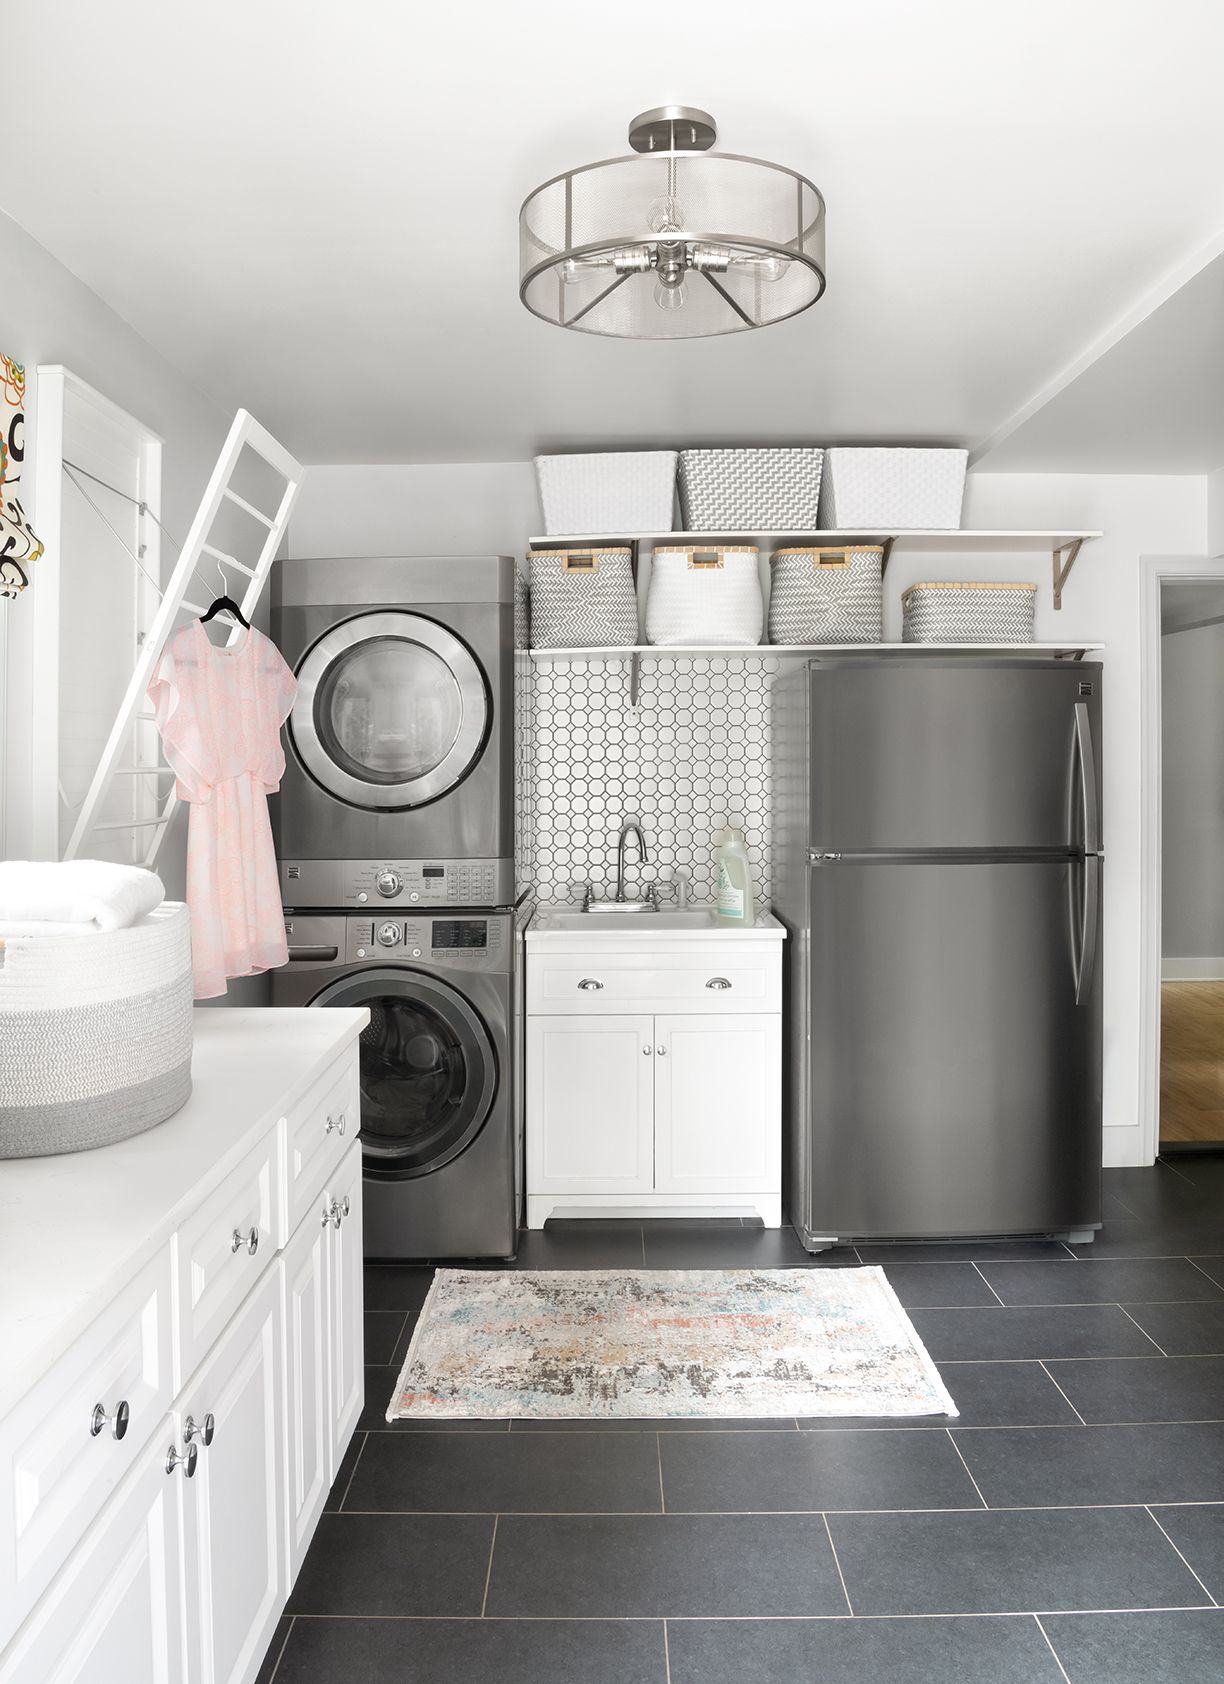 10 Storage Ideas for Small Laundry Rooms - Scattered Thoughts of a